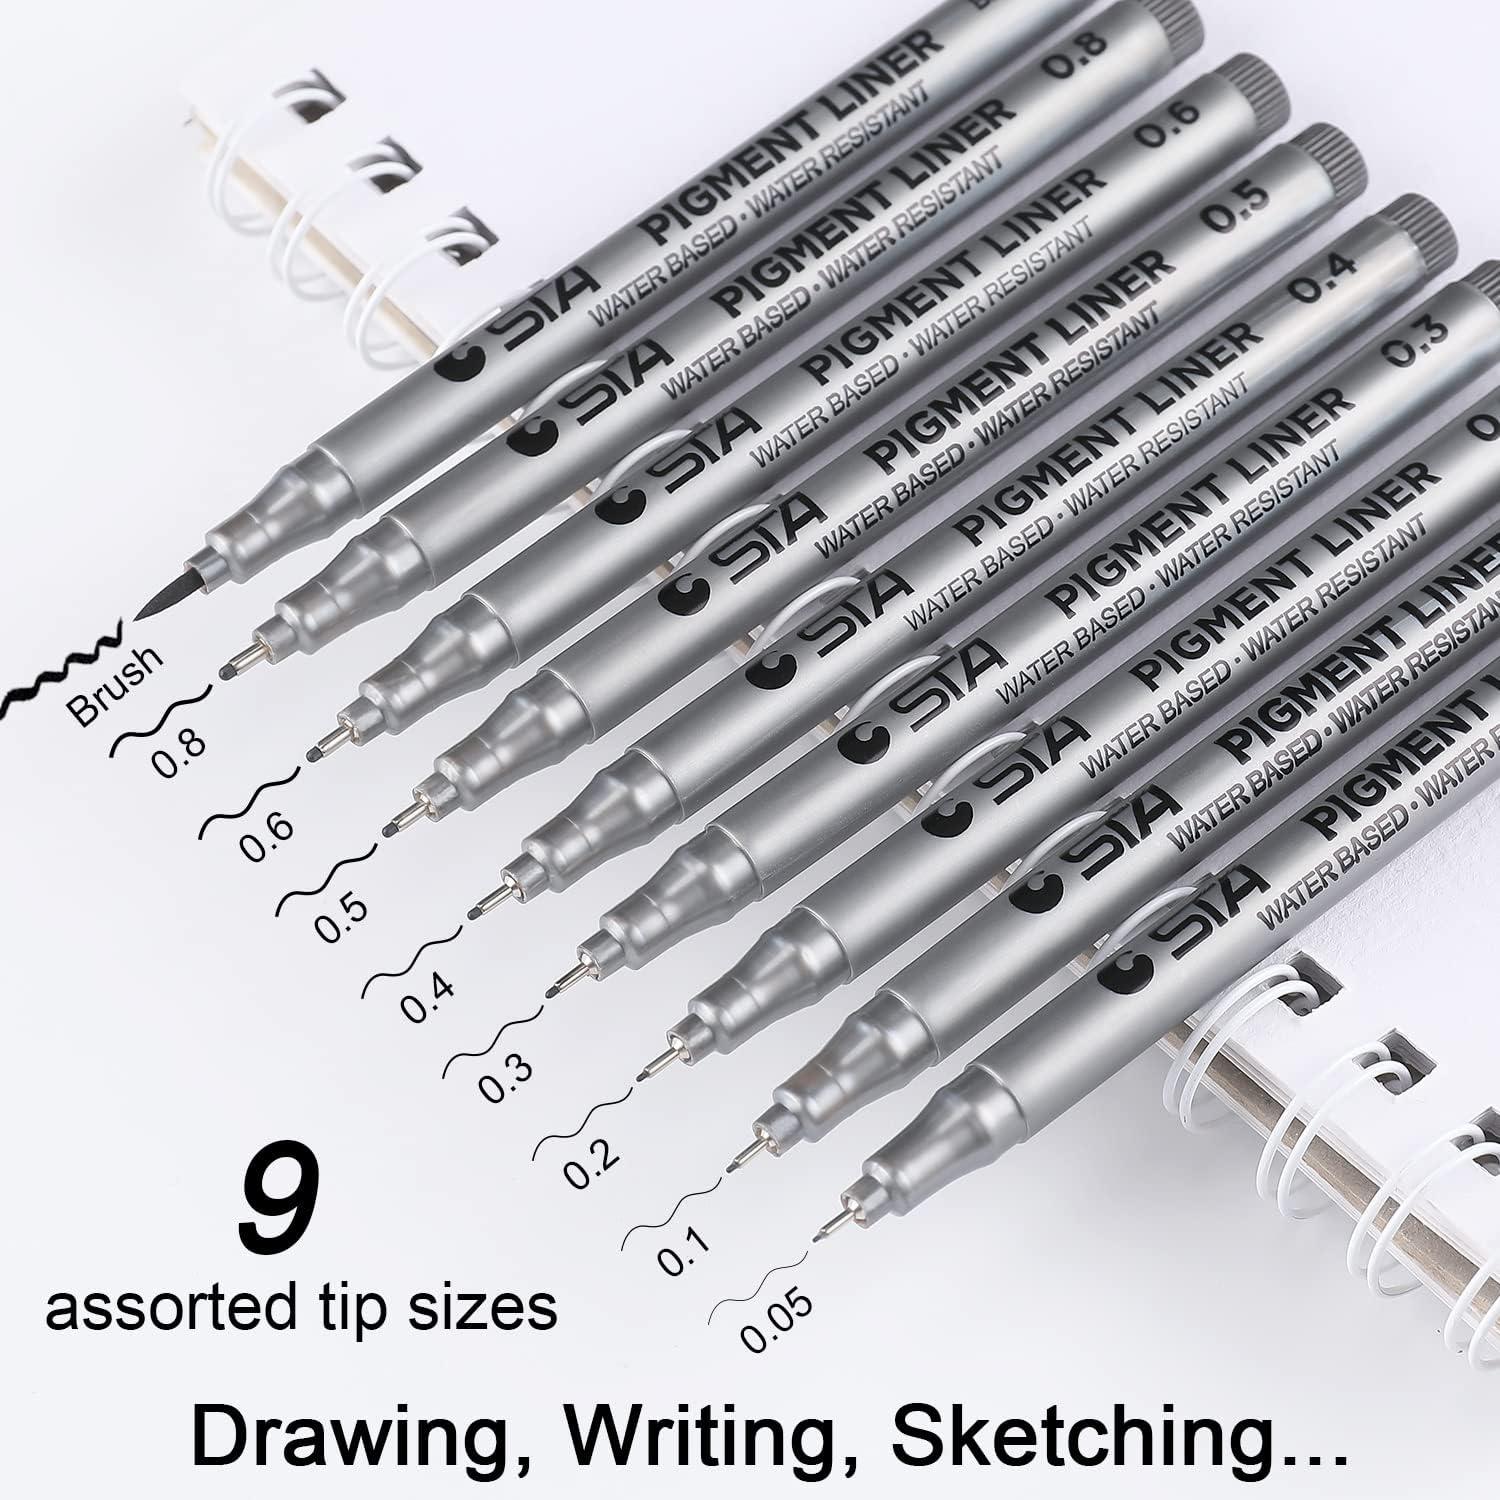 9 pcs Art Marker Pen Different Types Pigment Liner Black Water Based Sketch  Brush Markers for Drawing Handwriting Supplies Stationery